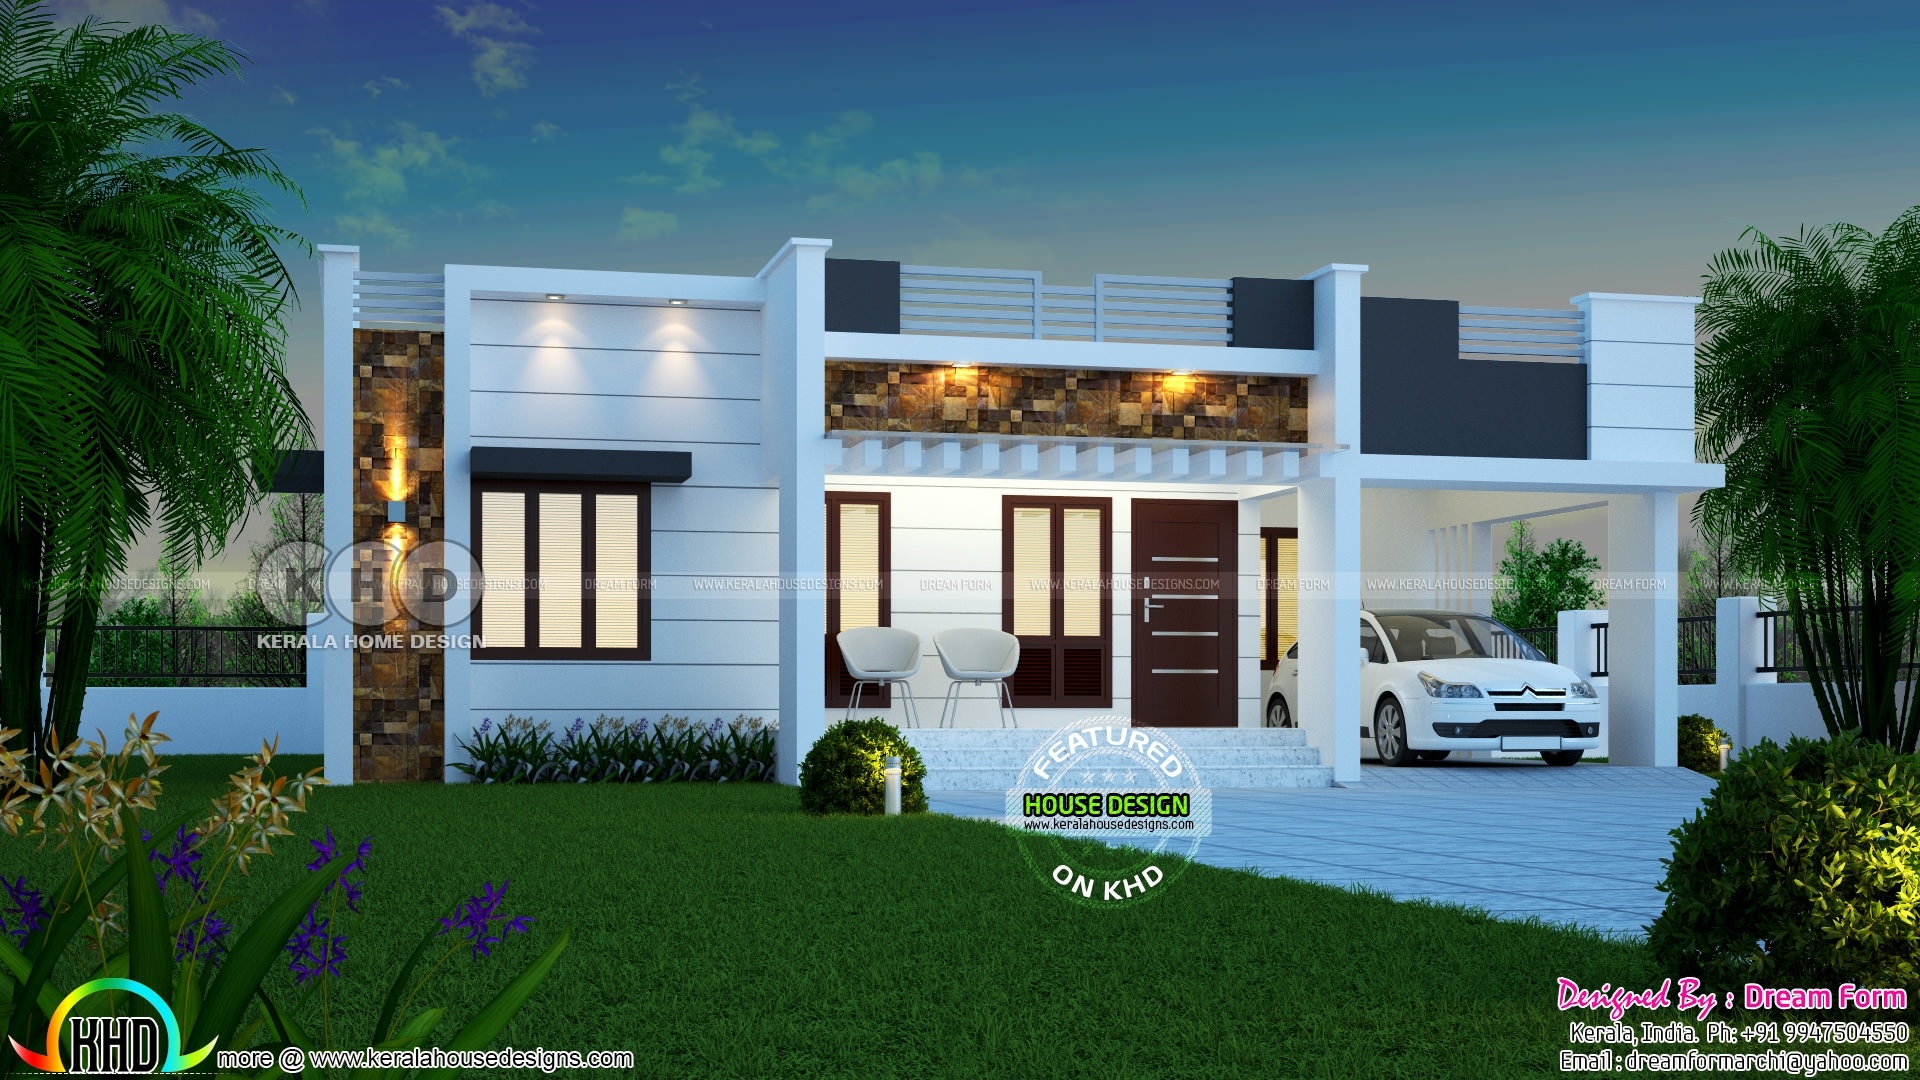 Most inspiring 1450 square feet 3 bedroom one floor kerala home kerala home design with three bedroom house plans kerala style